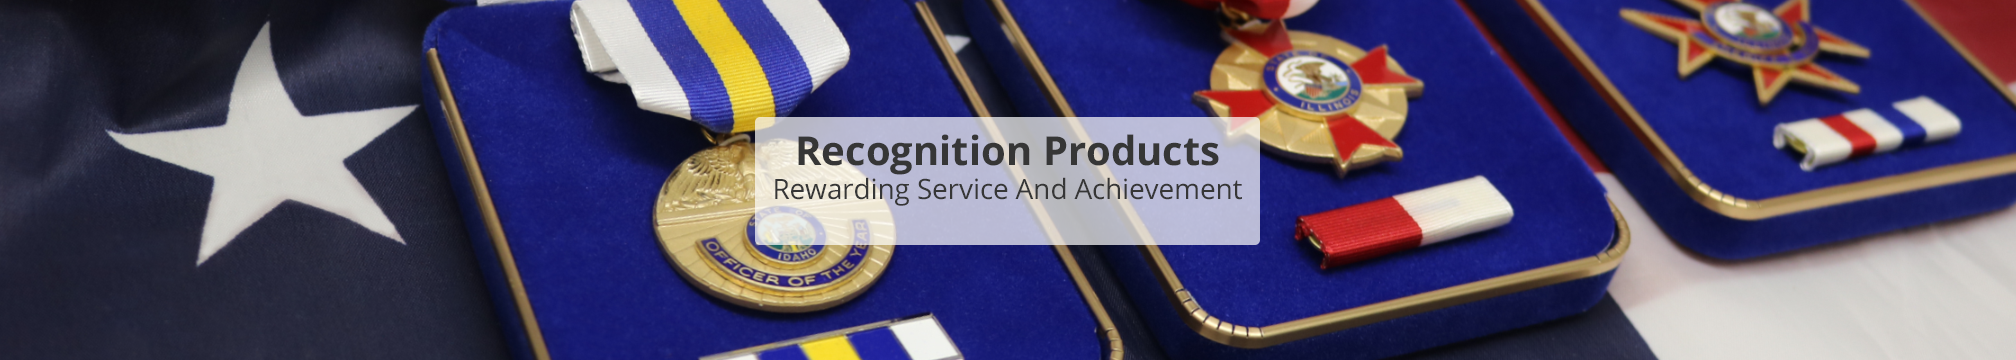 Recognition Products